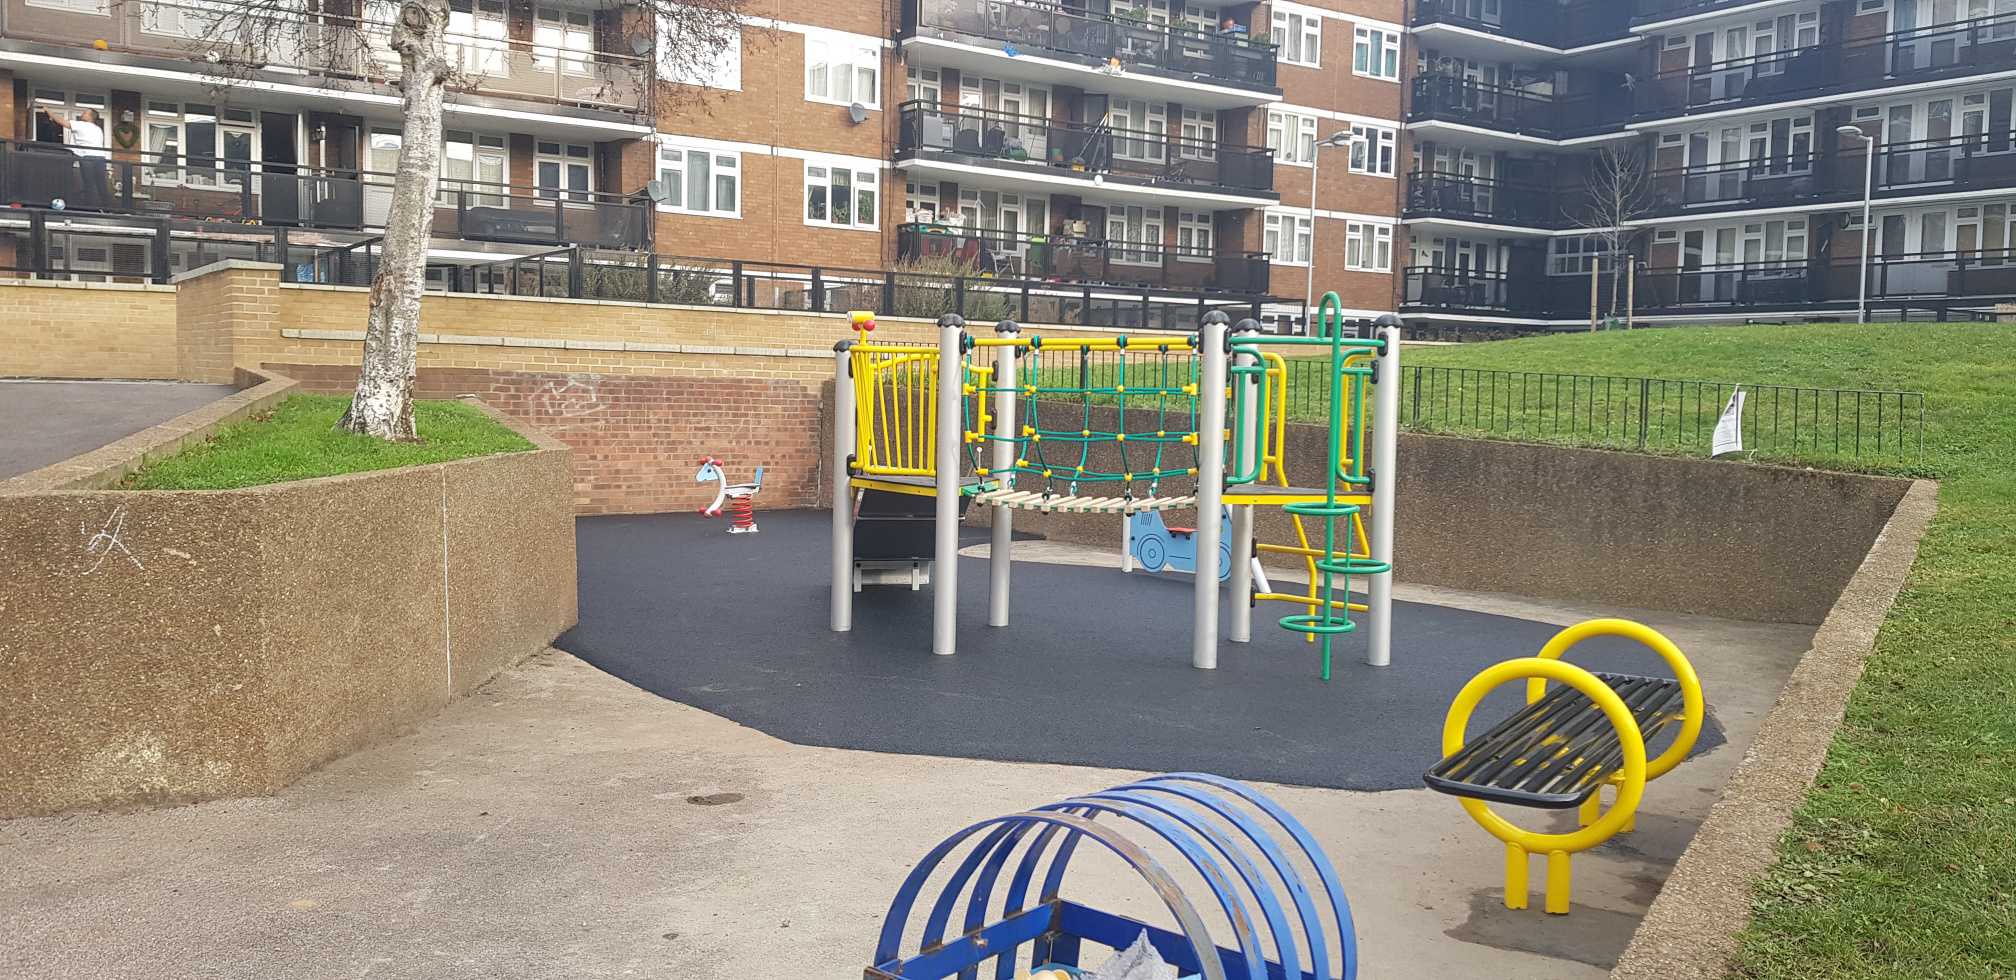 The new playground was the result of a resident's bid to the Cleaner, Greener Safer fund